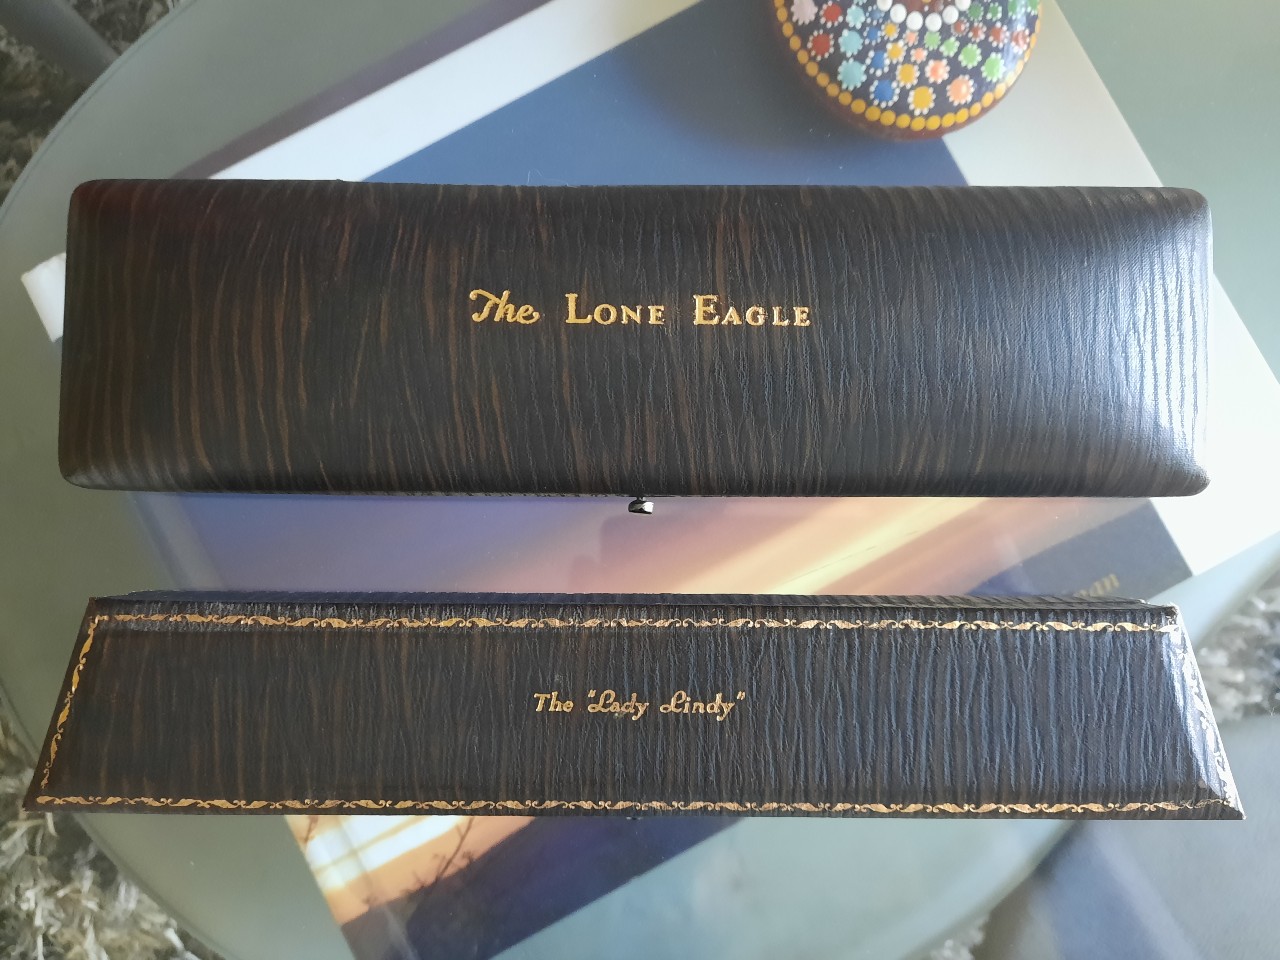 Bulova Lone Eagle and Lady Lindy watch cases.